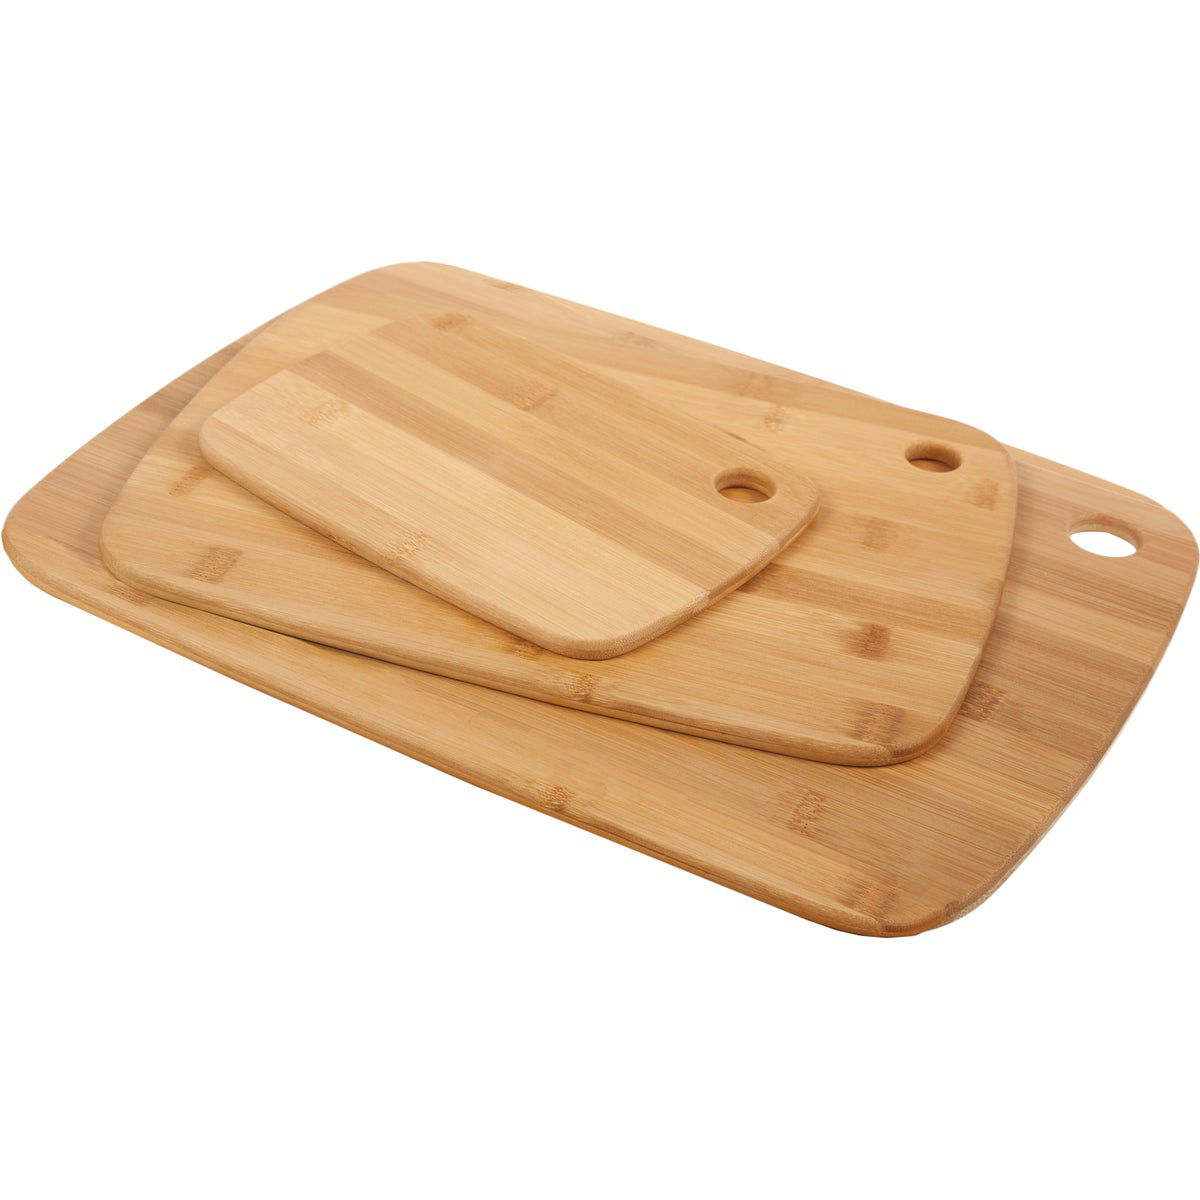 Core Bamboo Classic Small/Medium/Large Natural Cutting Board (3-Pack)